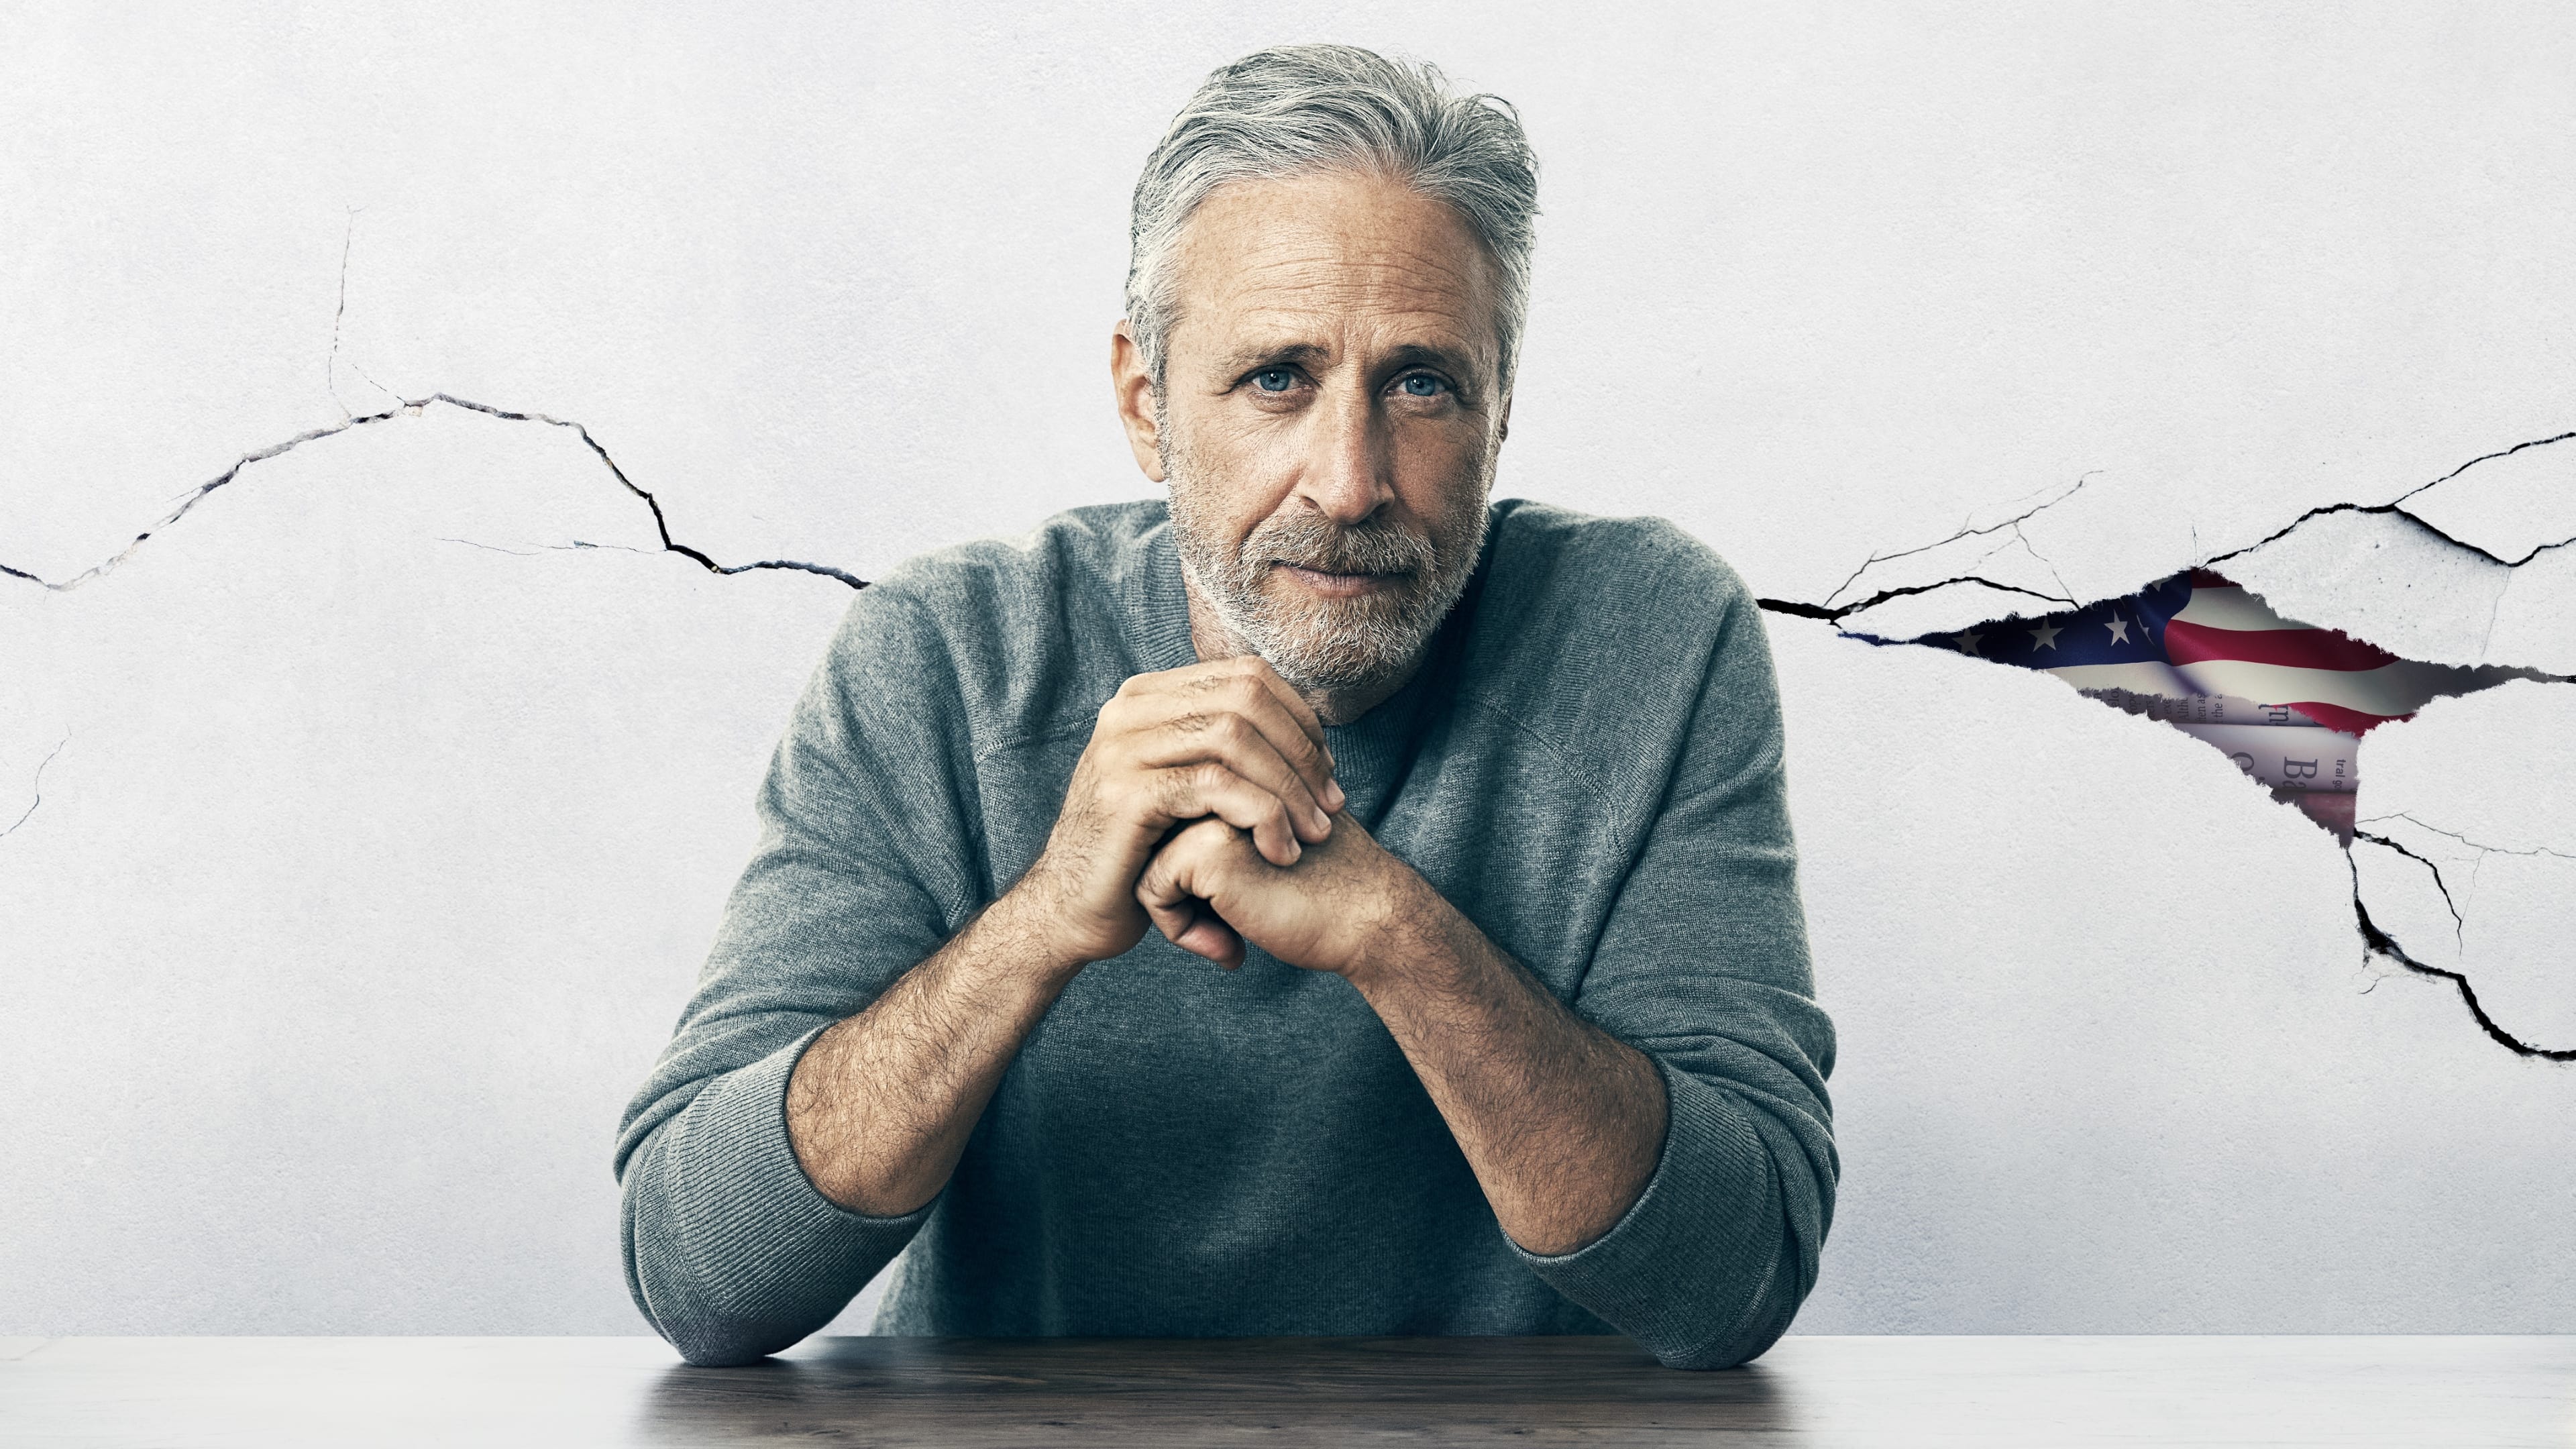 The Problem With Jon Stewart Gallery Image